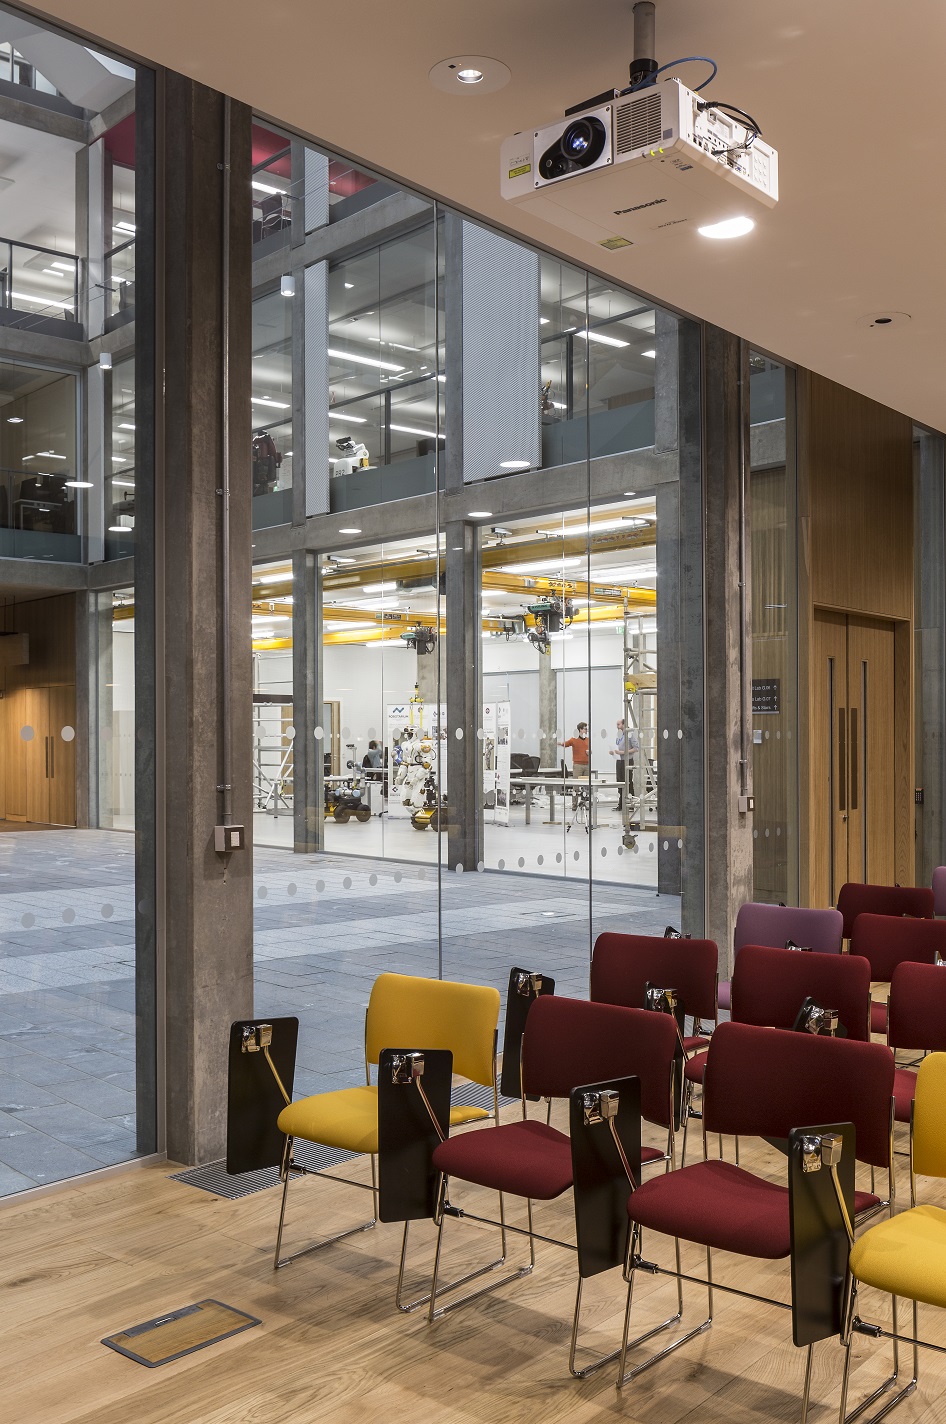 Indeglas completes interior glass installation at The Bayes Centre